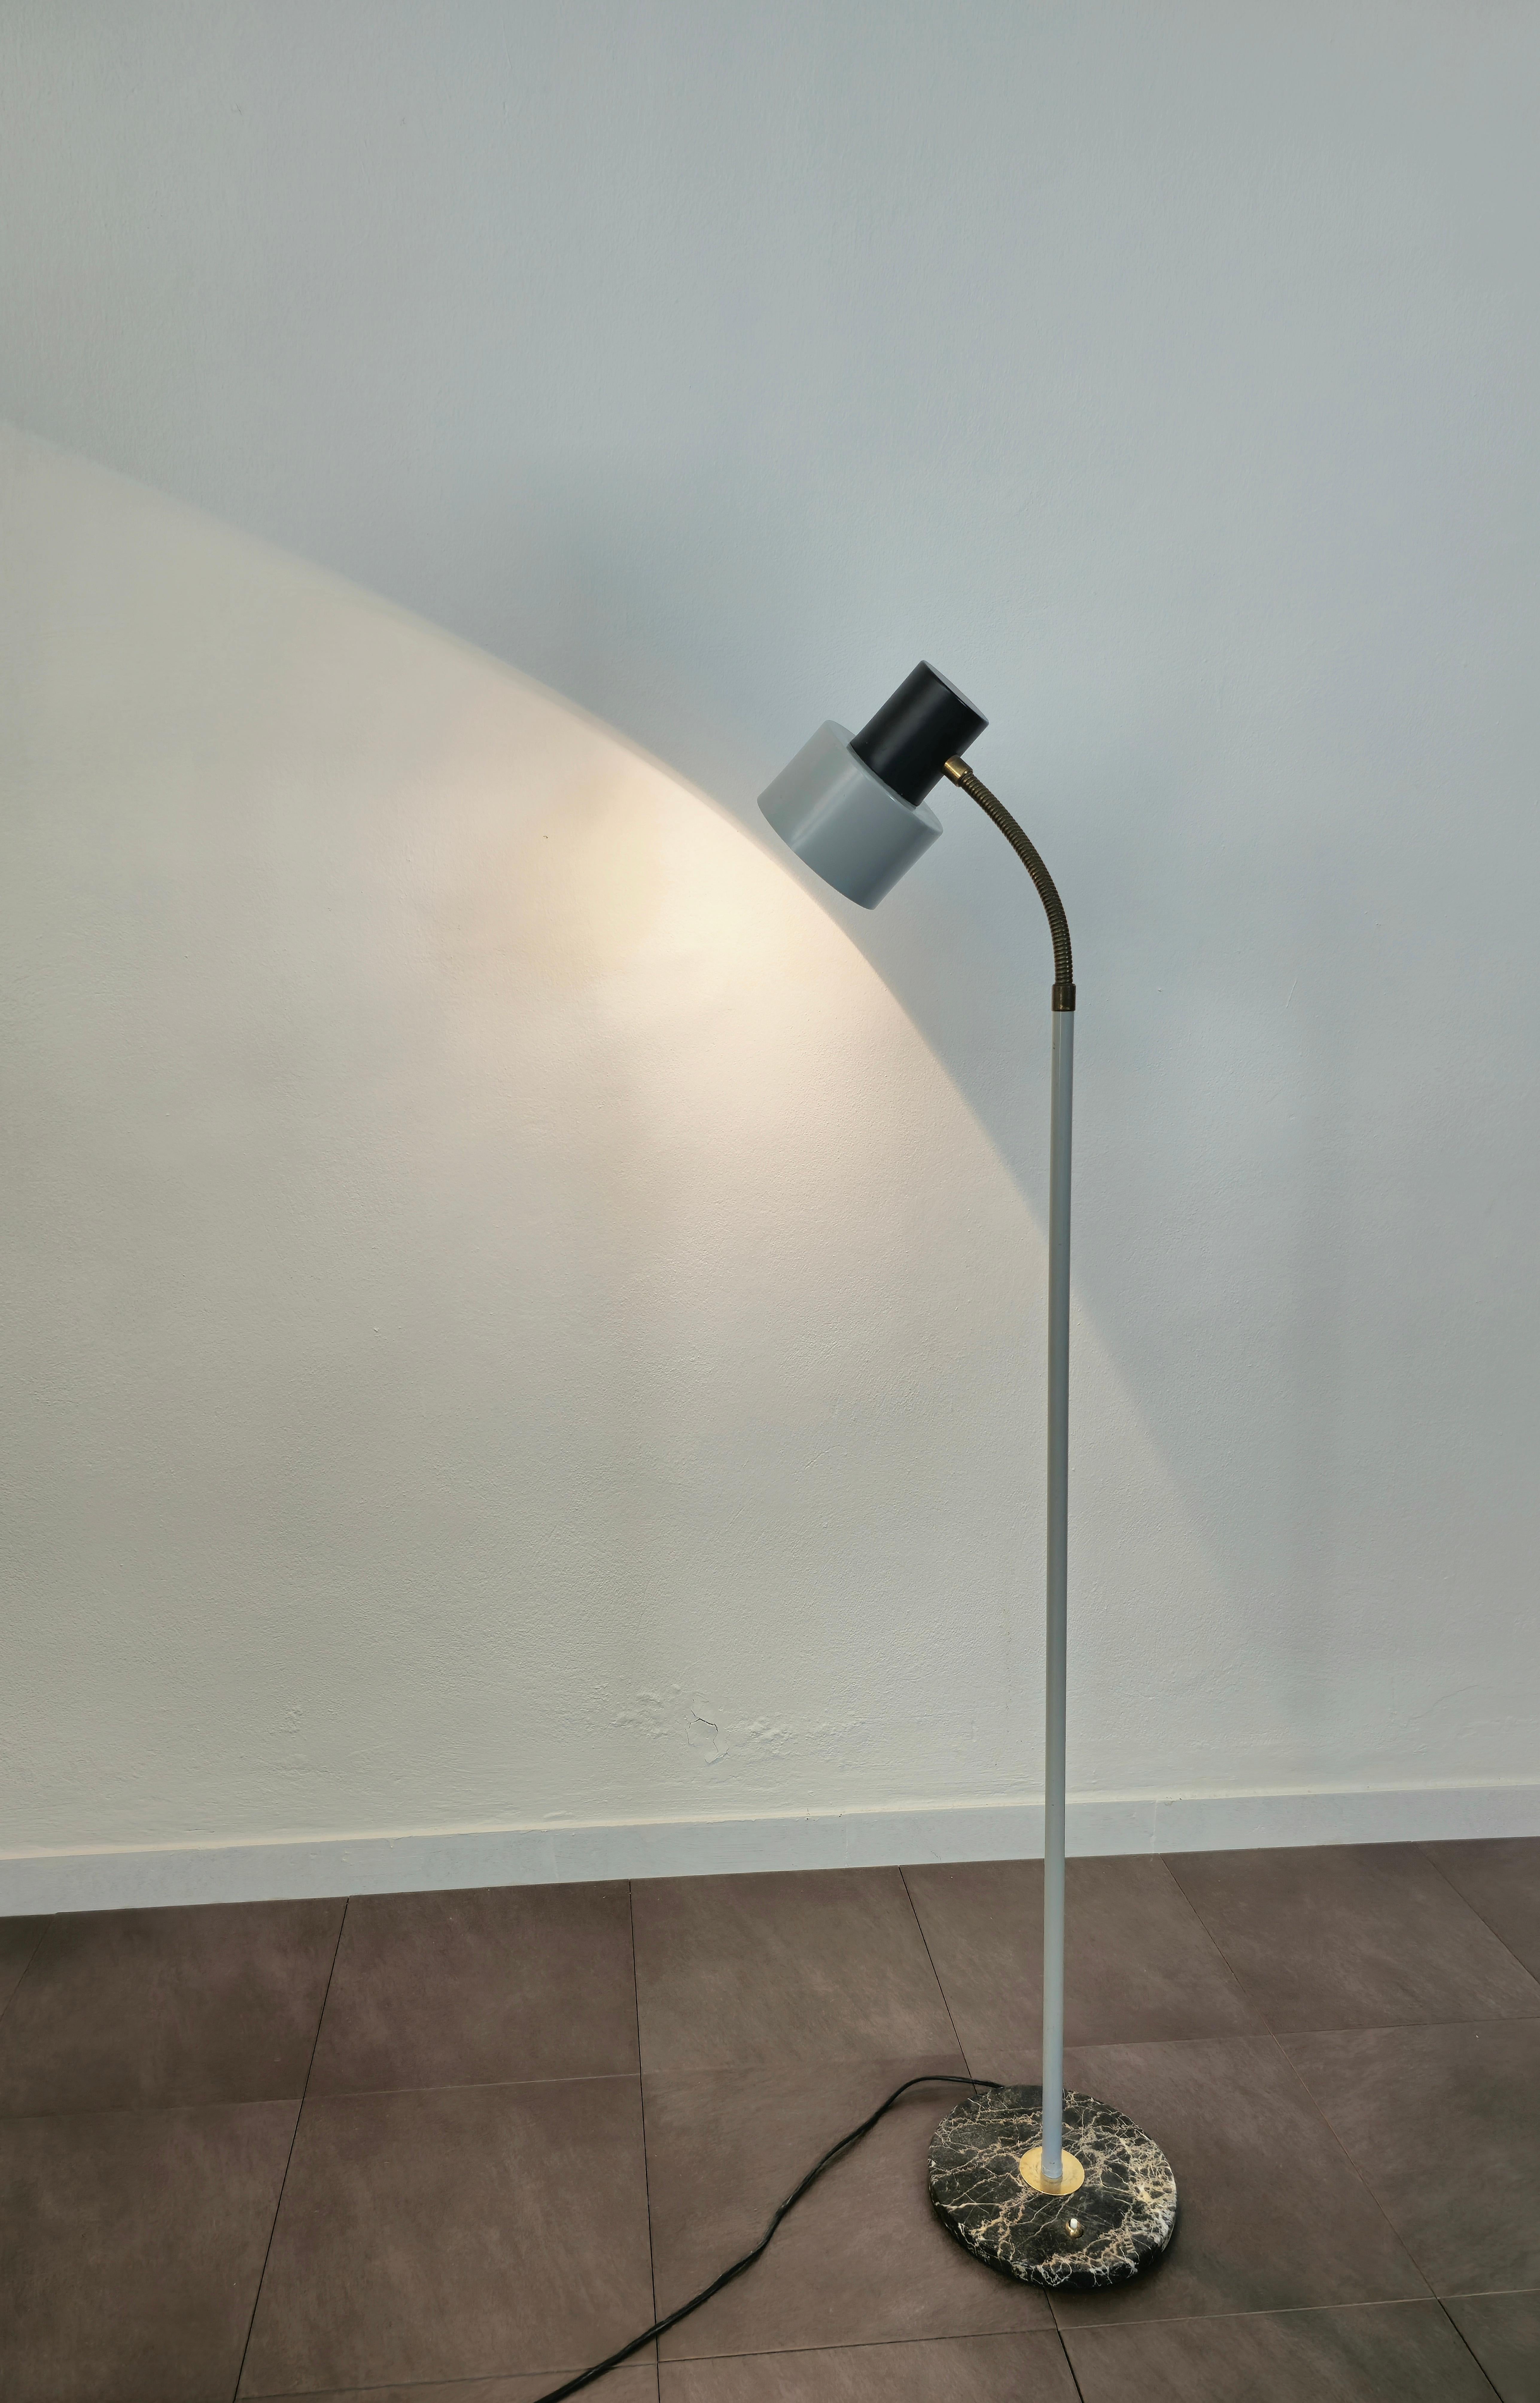 Floor lamp attributed to Stilux and produced in Italy in the 1950s/60s.
The lamp was made with a circular marble base with switch, gray enamelled metal stem and black and gray enamelled aluminum diffuser which can be directed thanks to the flexible